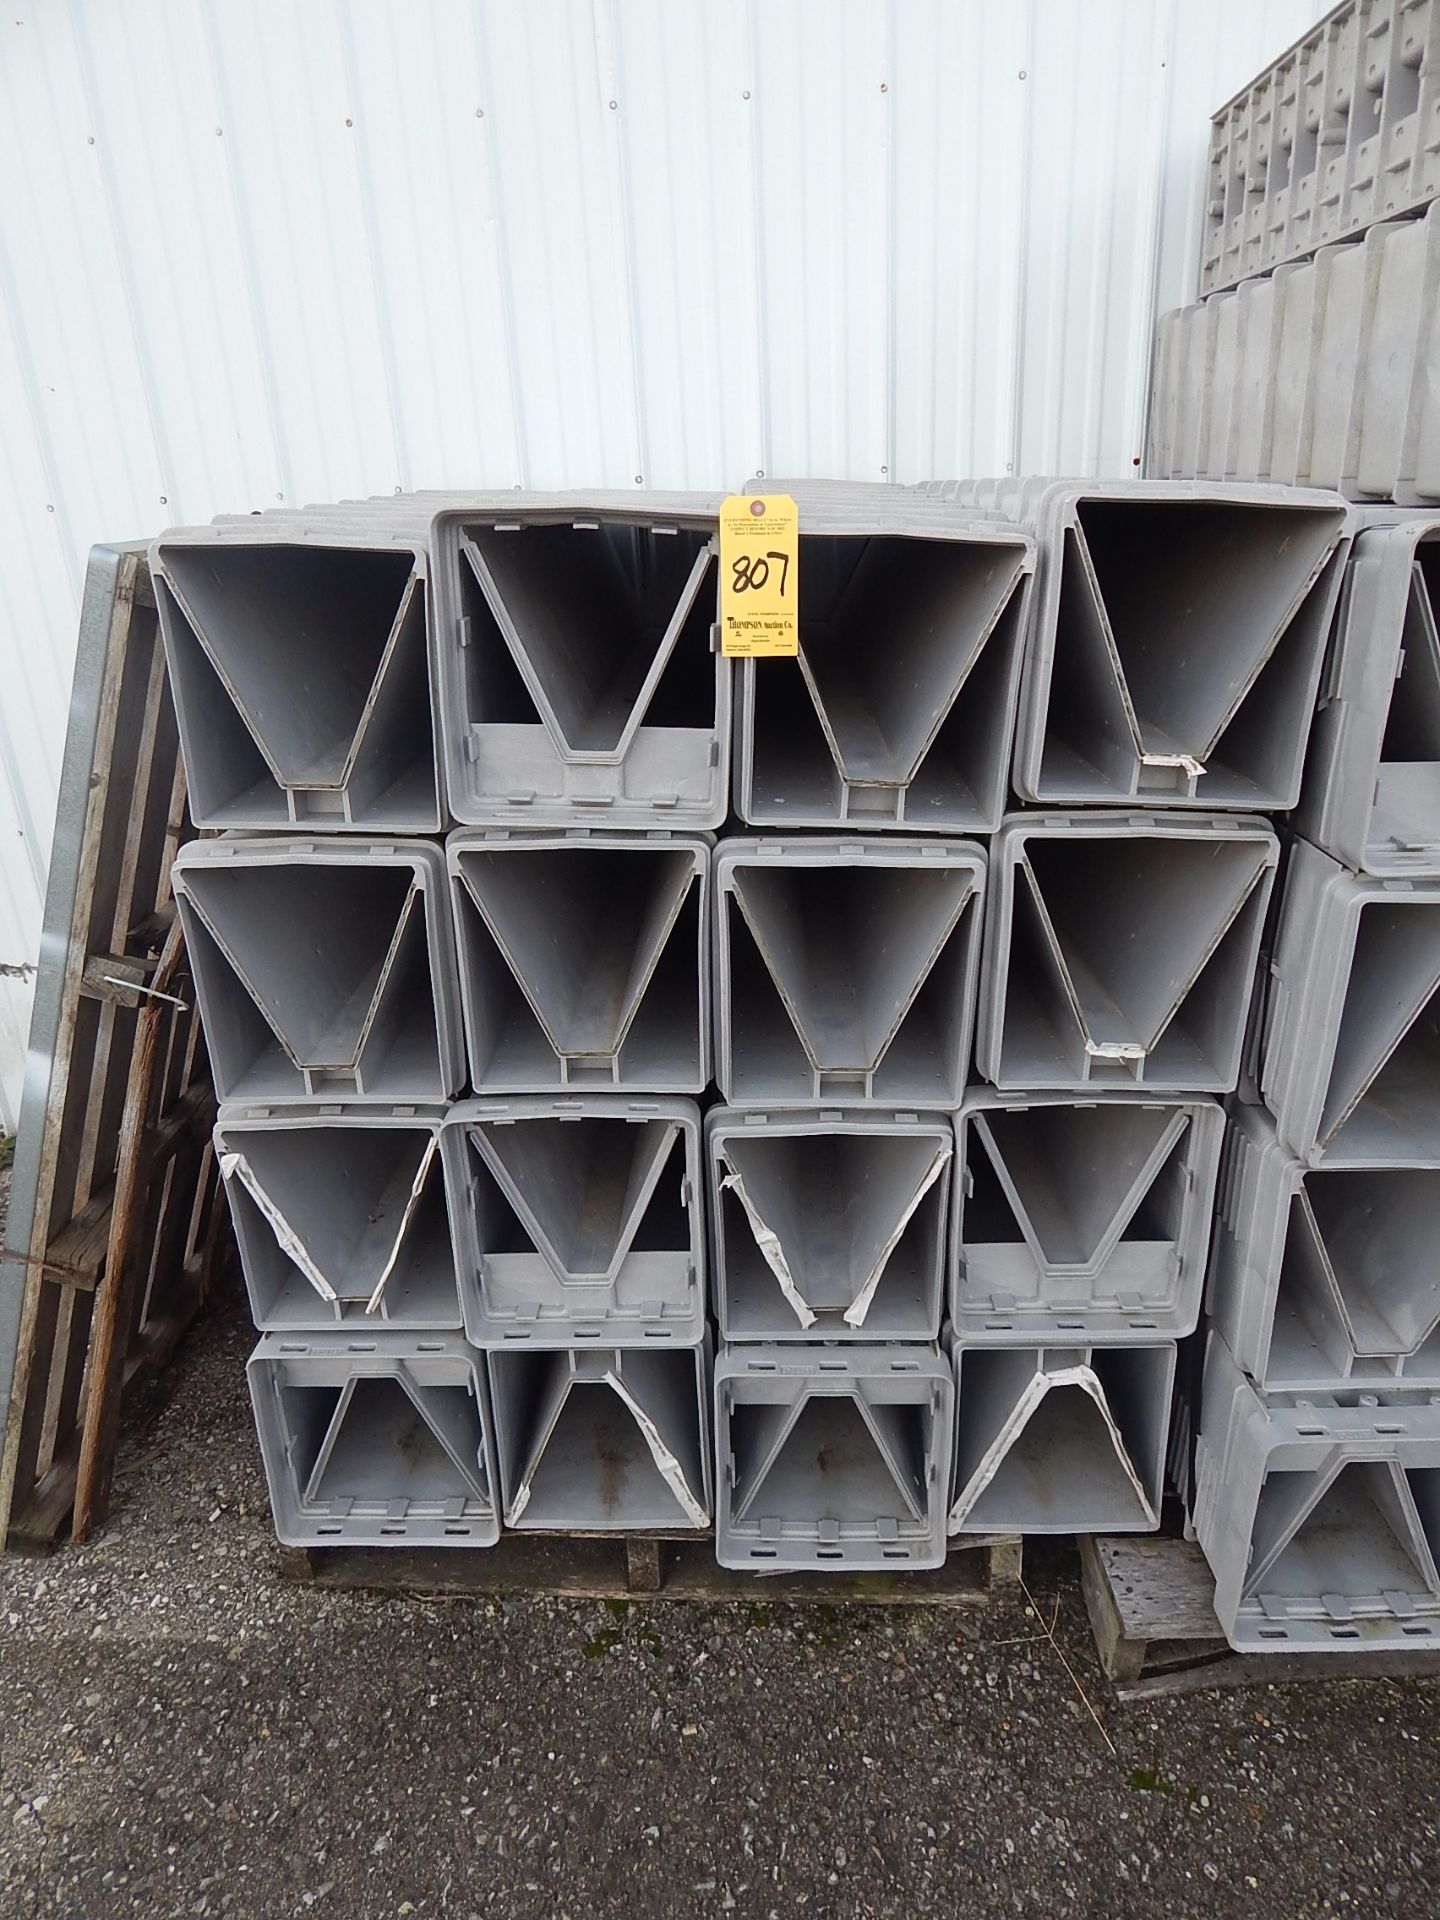 Leopold HDPE Plastic Culvert/Drain Tile, (16) Pieces, Allowing a Total Length of 64' Per Lot, Heavy